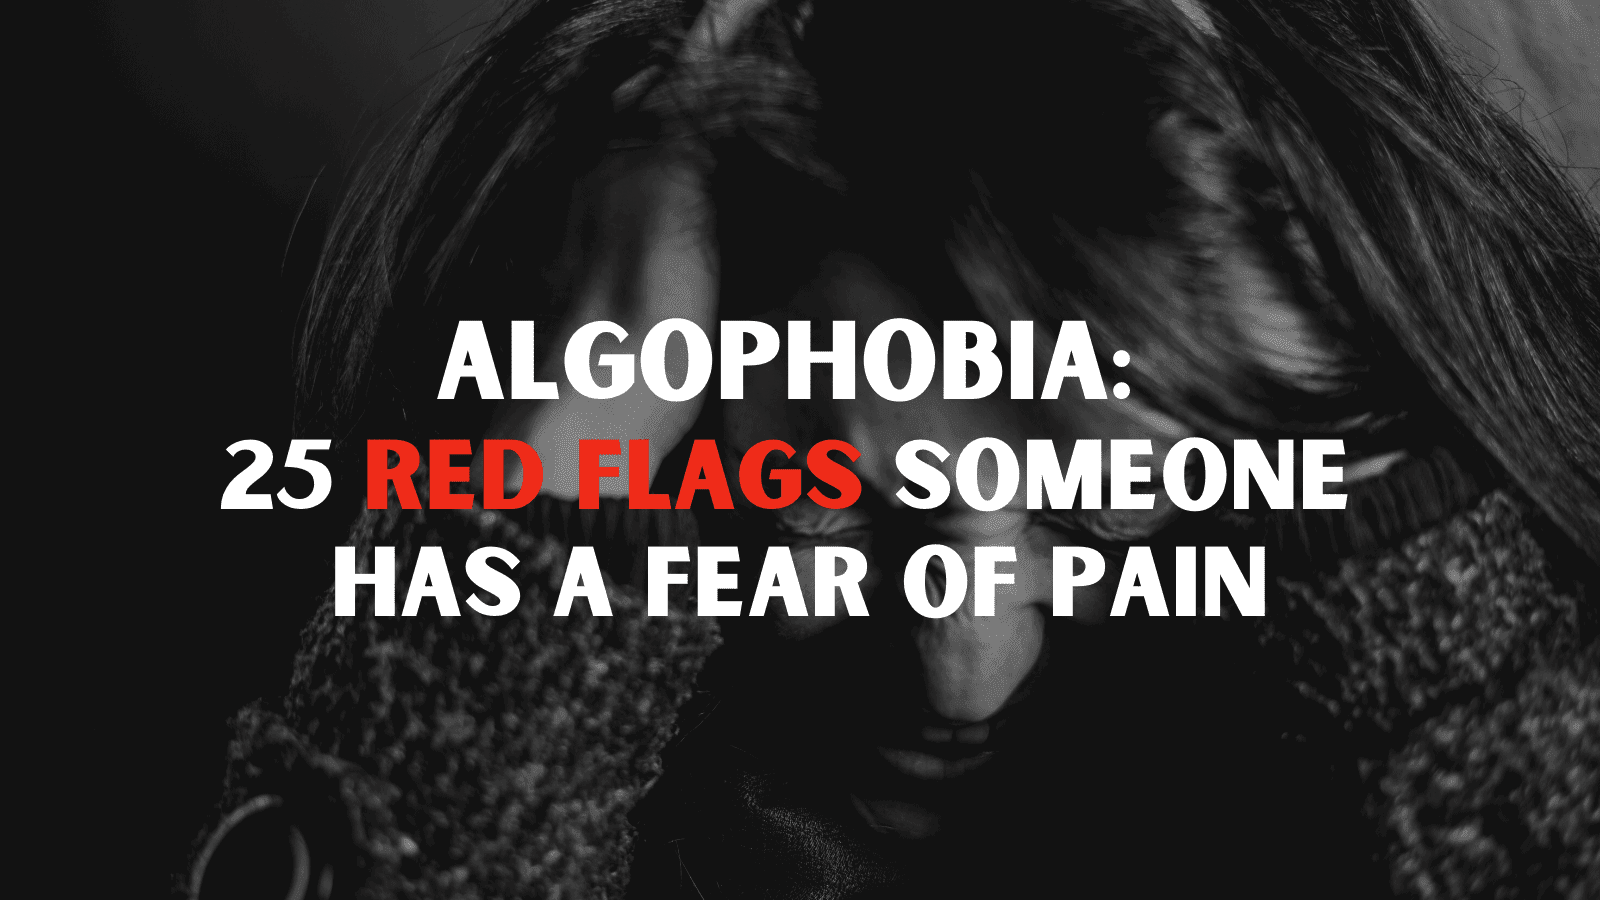 Algophobia: 25 Red Flags Someone Has a Fear of Pain